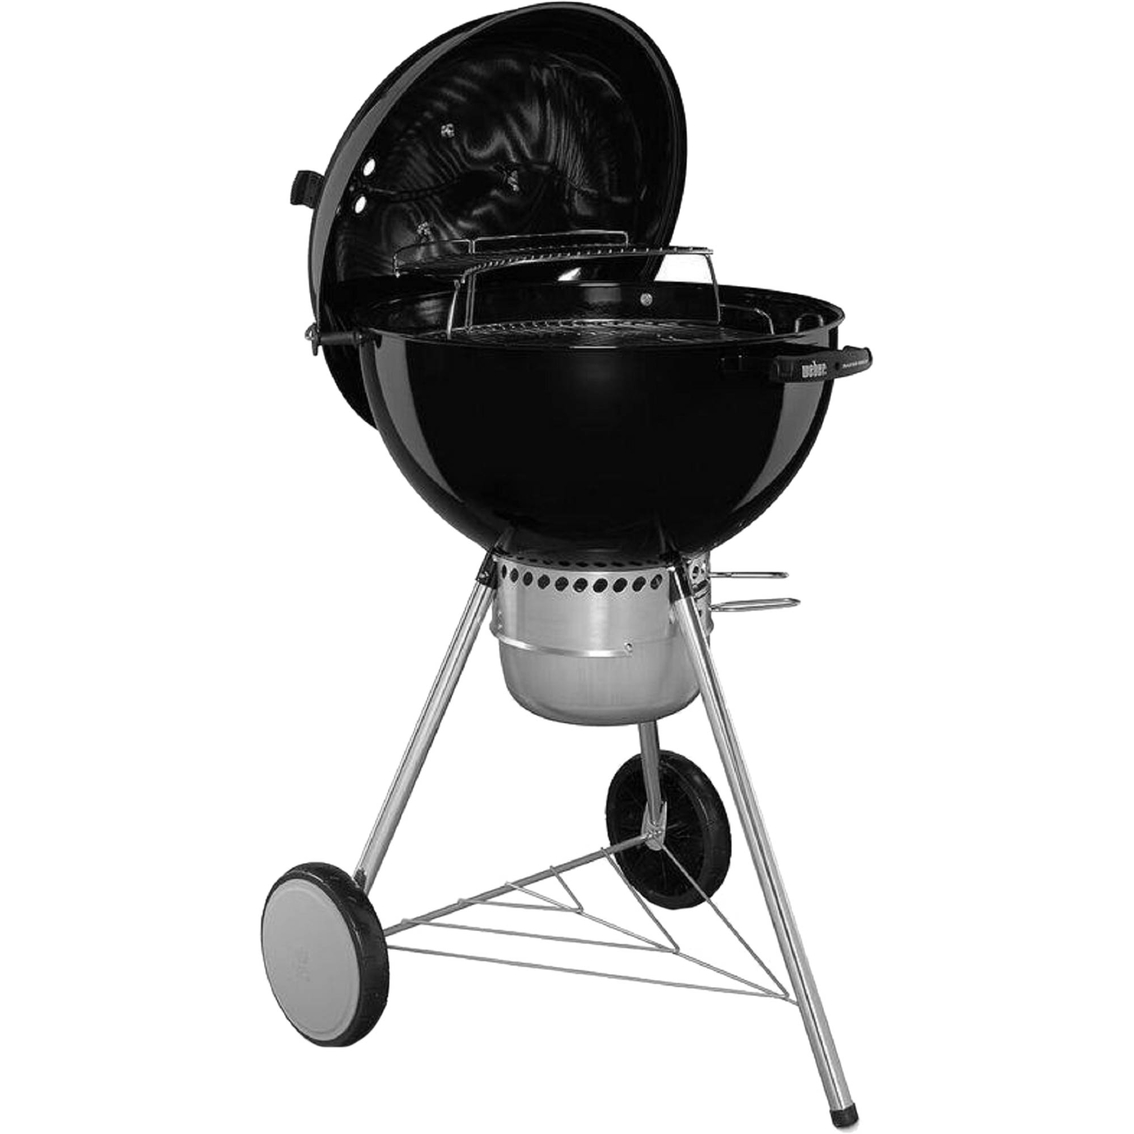 Weber 22 in. Master Touch Charcoal Grill - Image 2 of 2